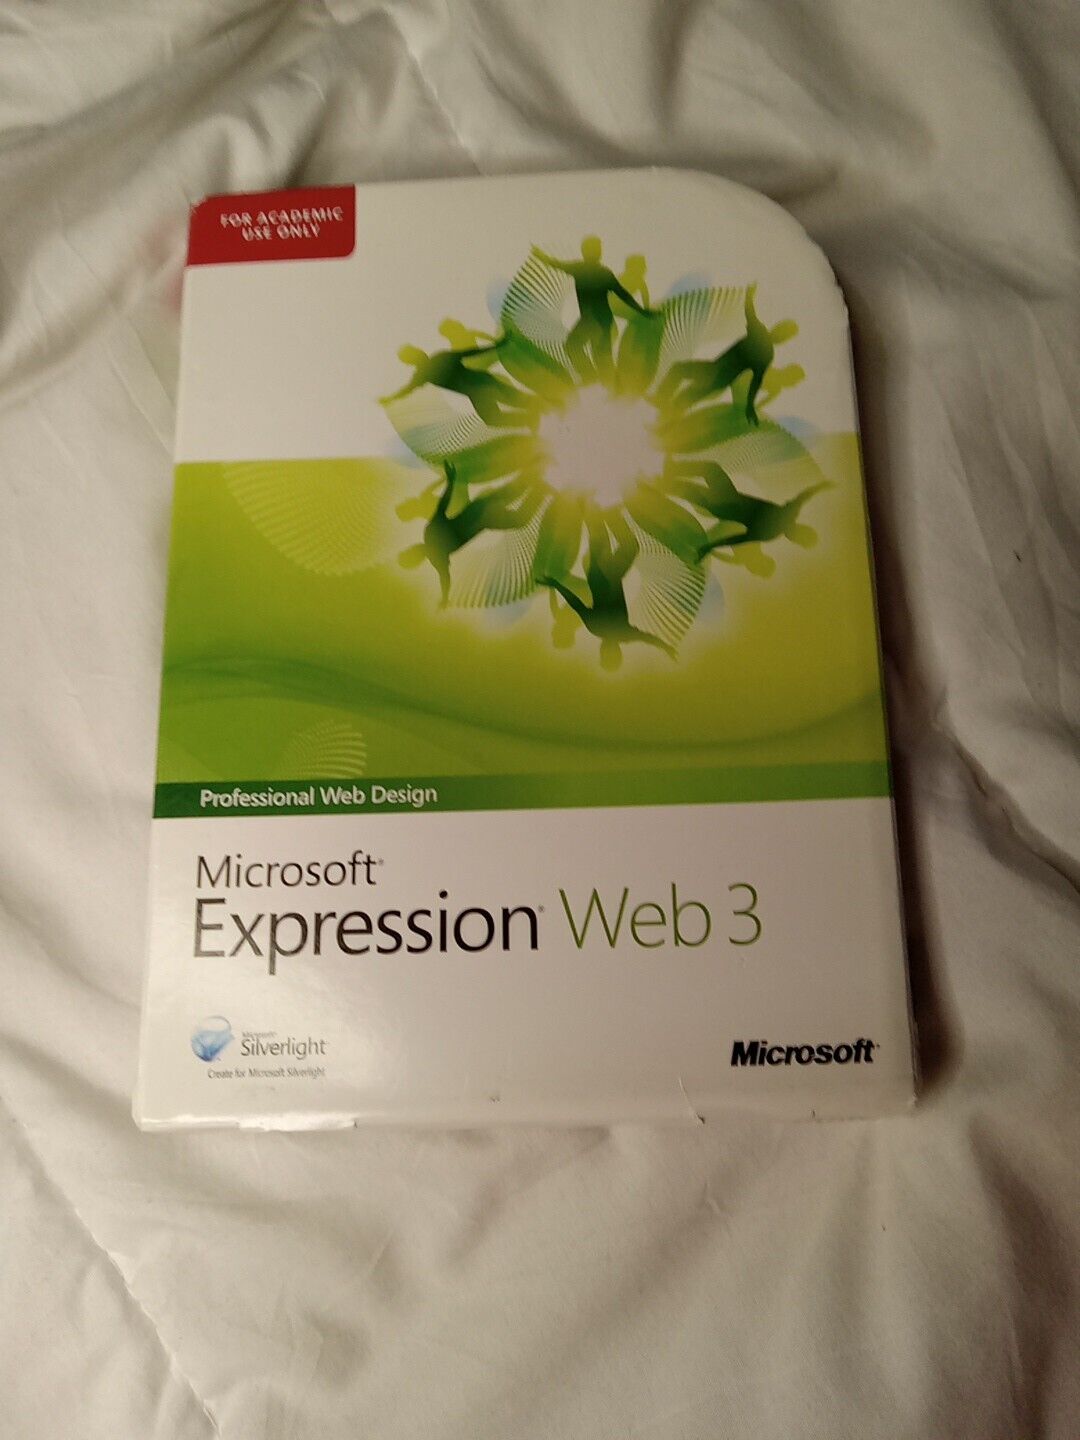 Microsoft Expression Web 3, Compatible With Windows 7, W Product Key And Manual